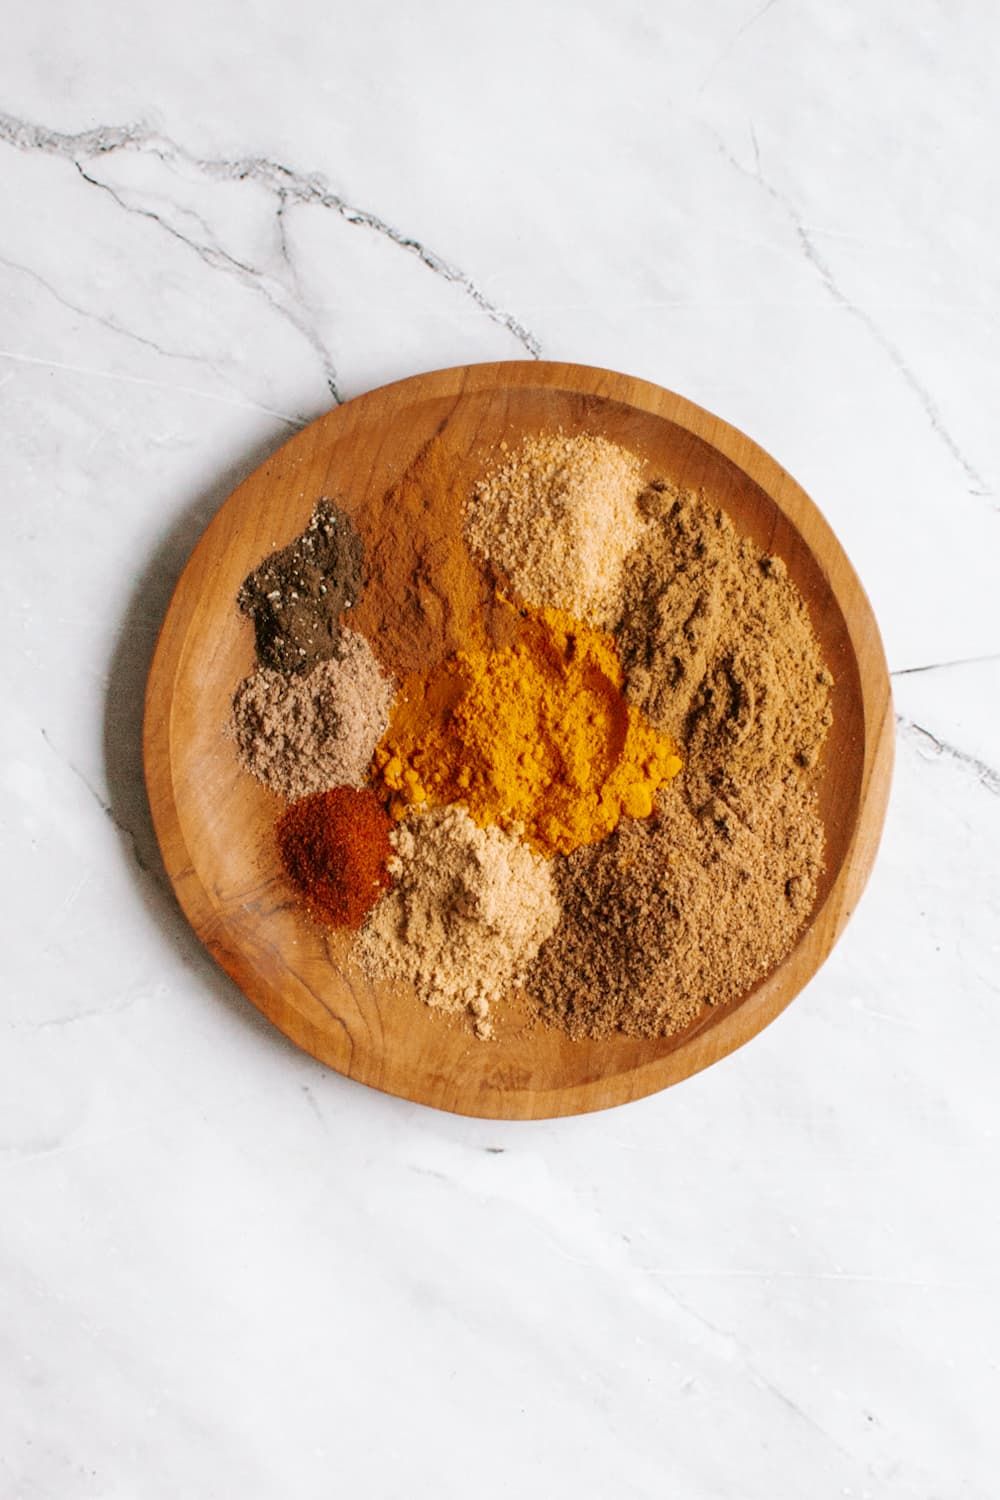 Curry spices including cumin, coriander, cinnamon, cardamom, and ginger on a plate  with a spoon.